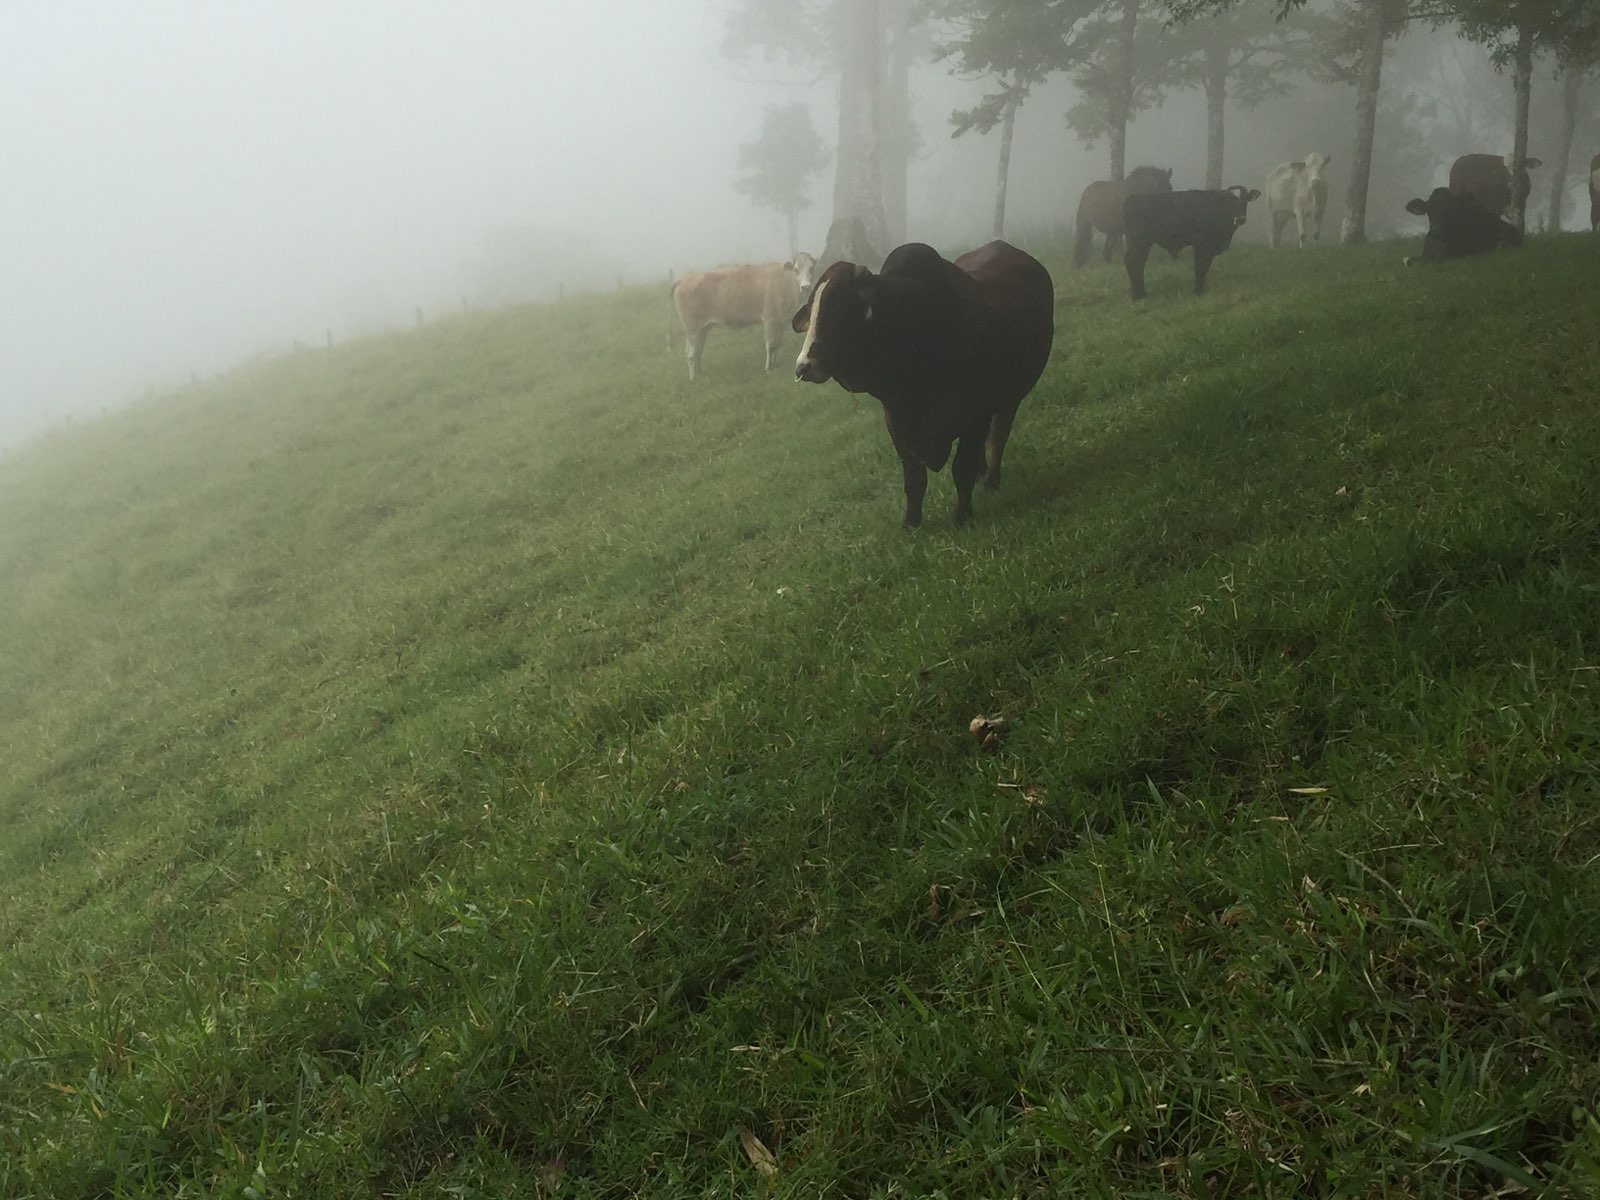 Cattle in the fog